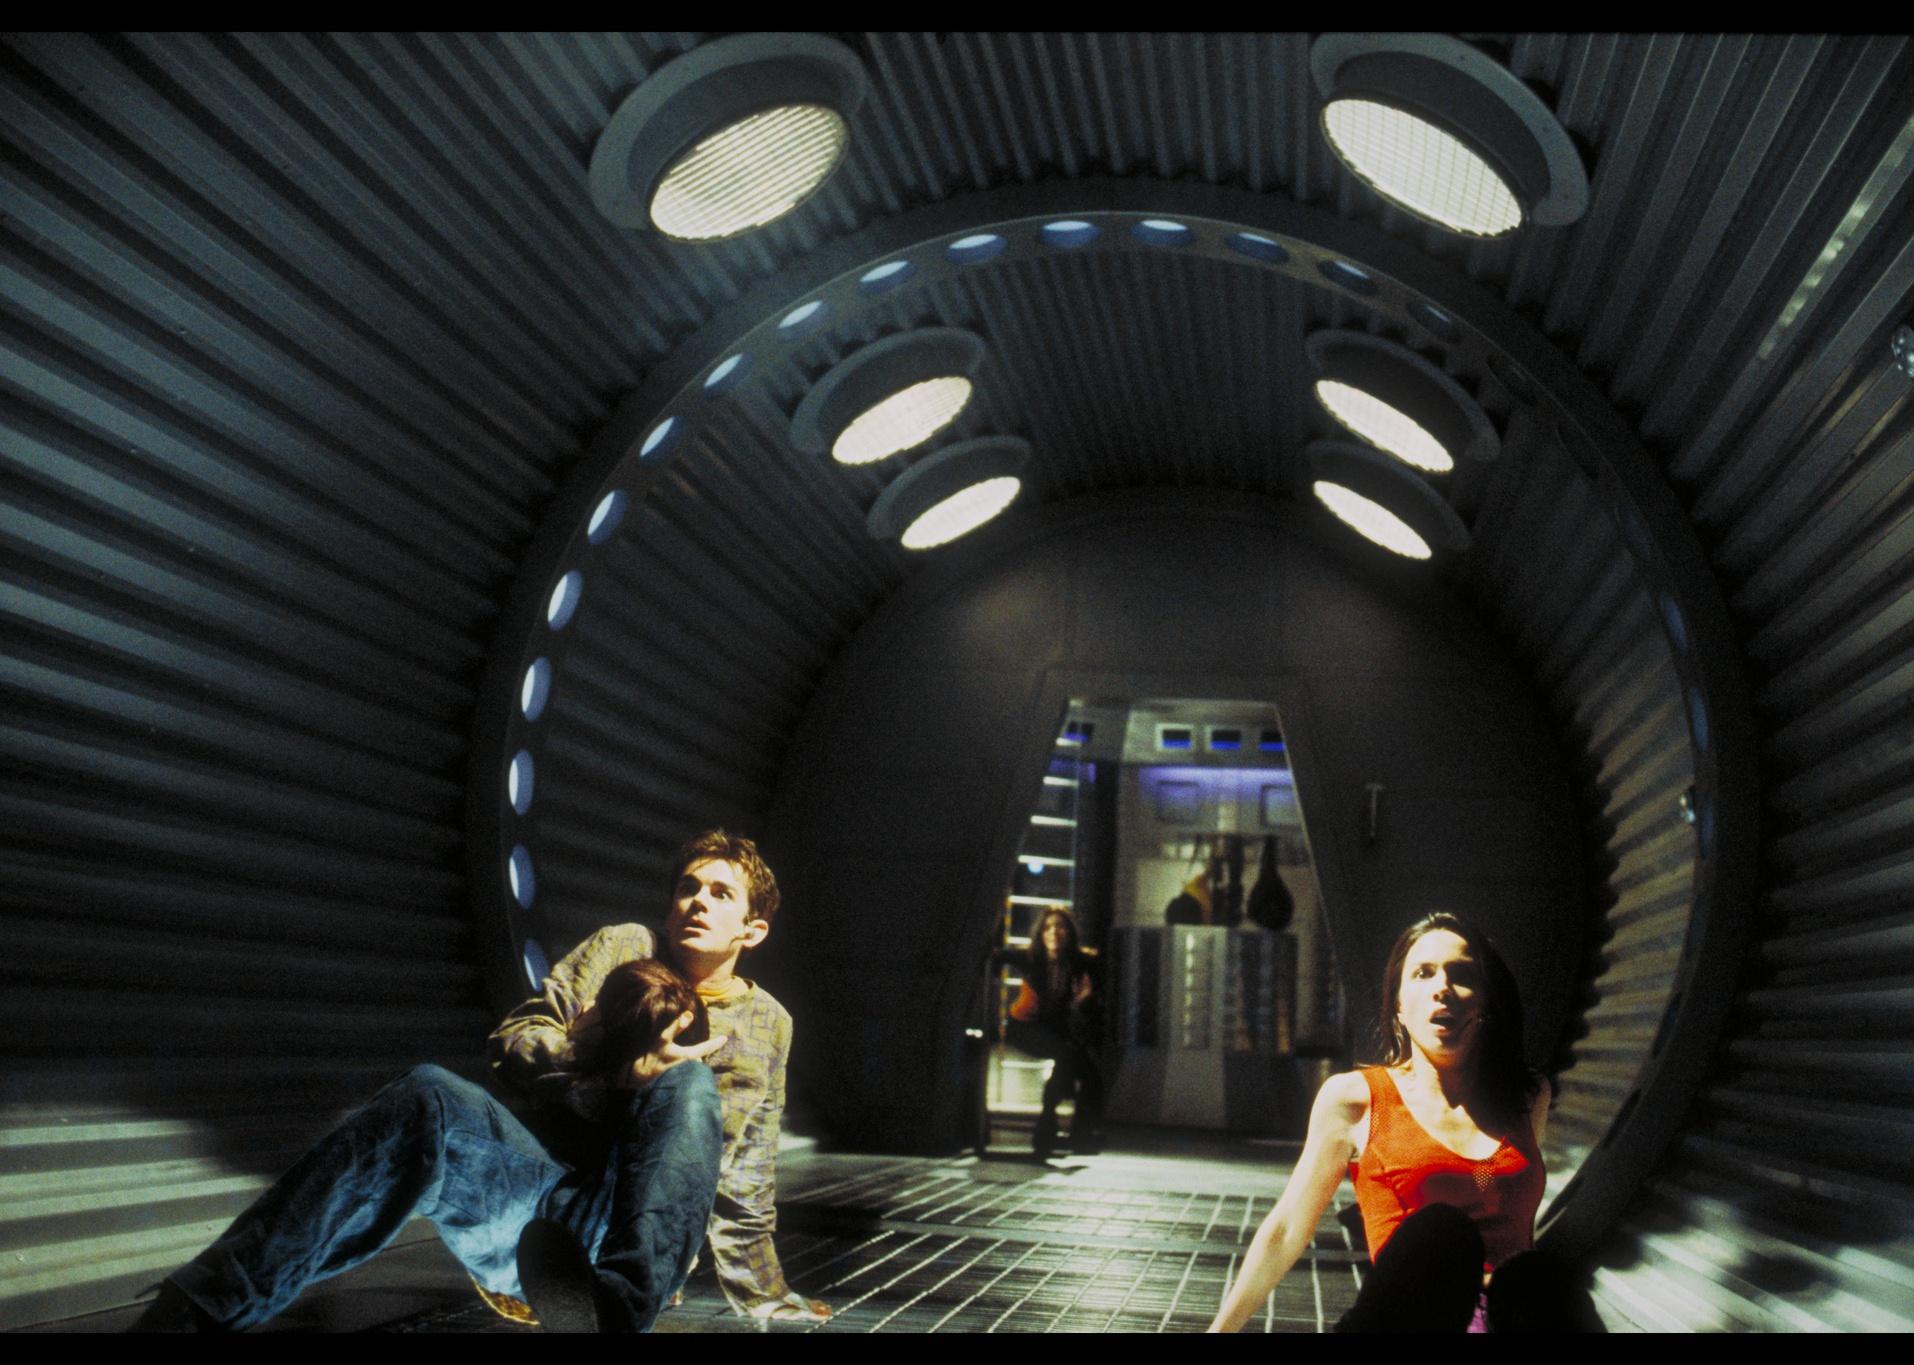 A young man and woman looking scared in a wide metal tubular tunnel.